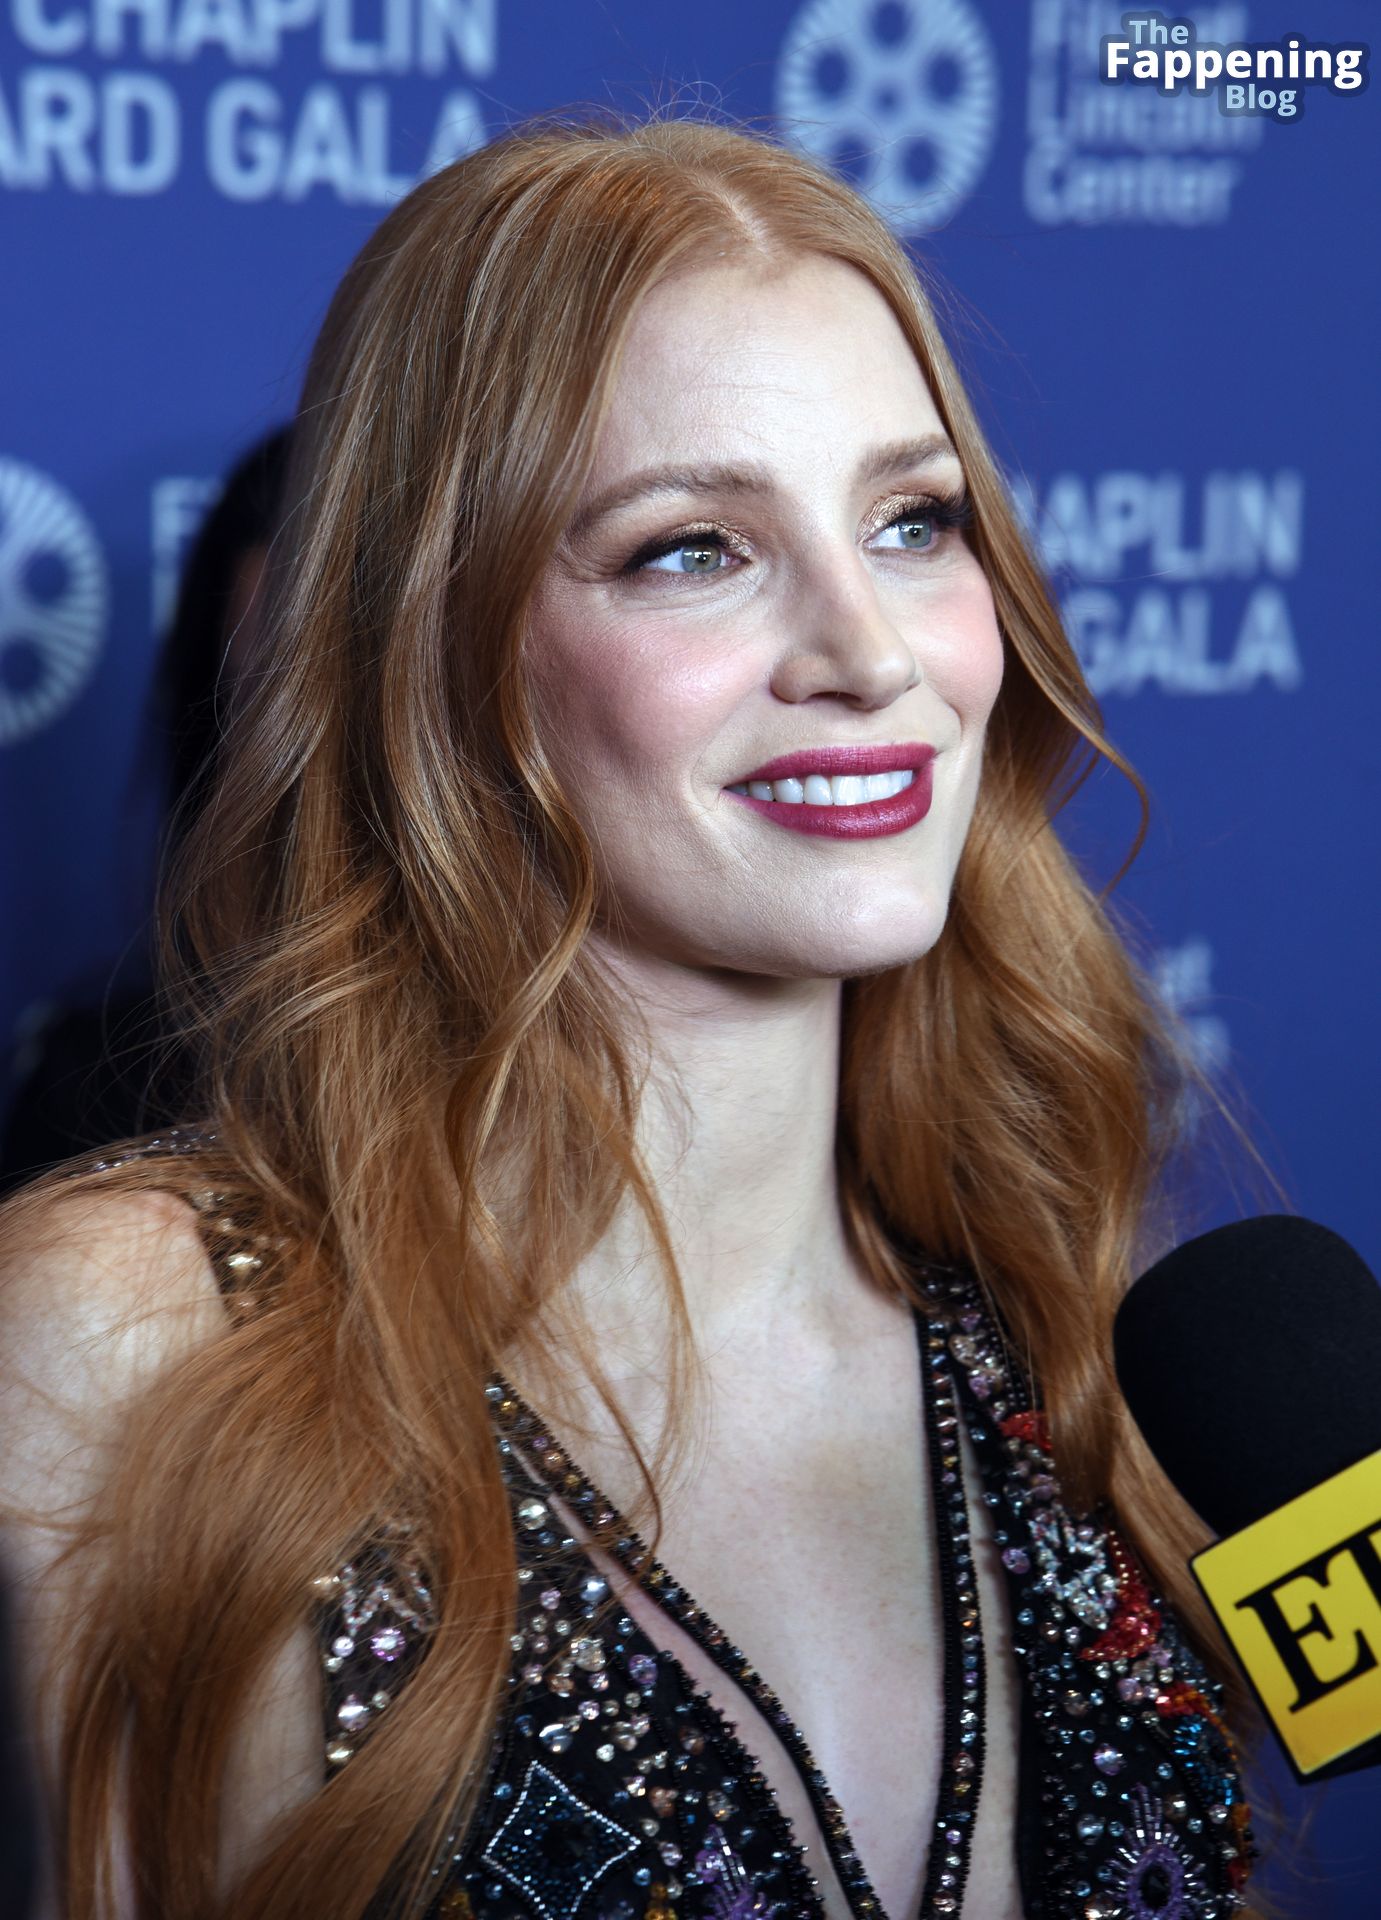 Jessica-Chastain-Sexy-The-Fappening-Blog-120.jpg